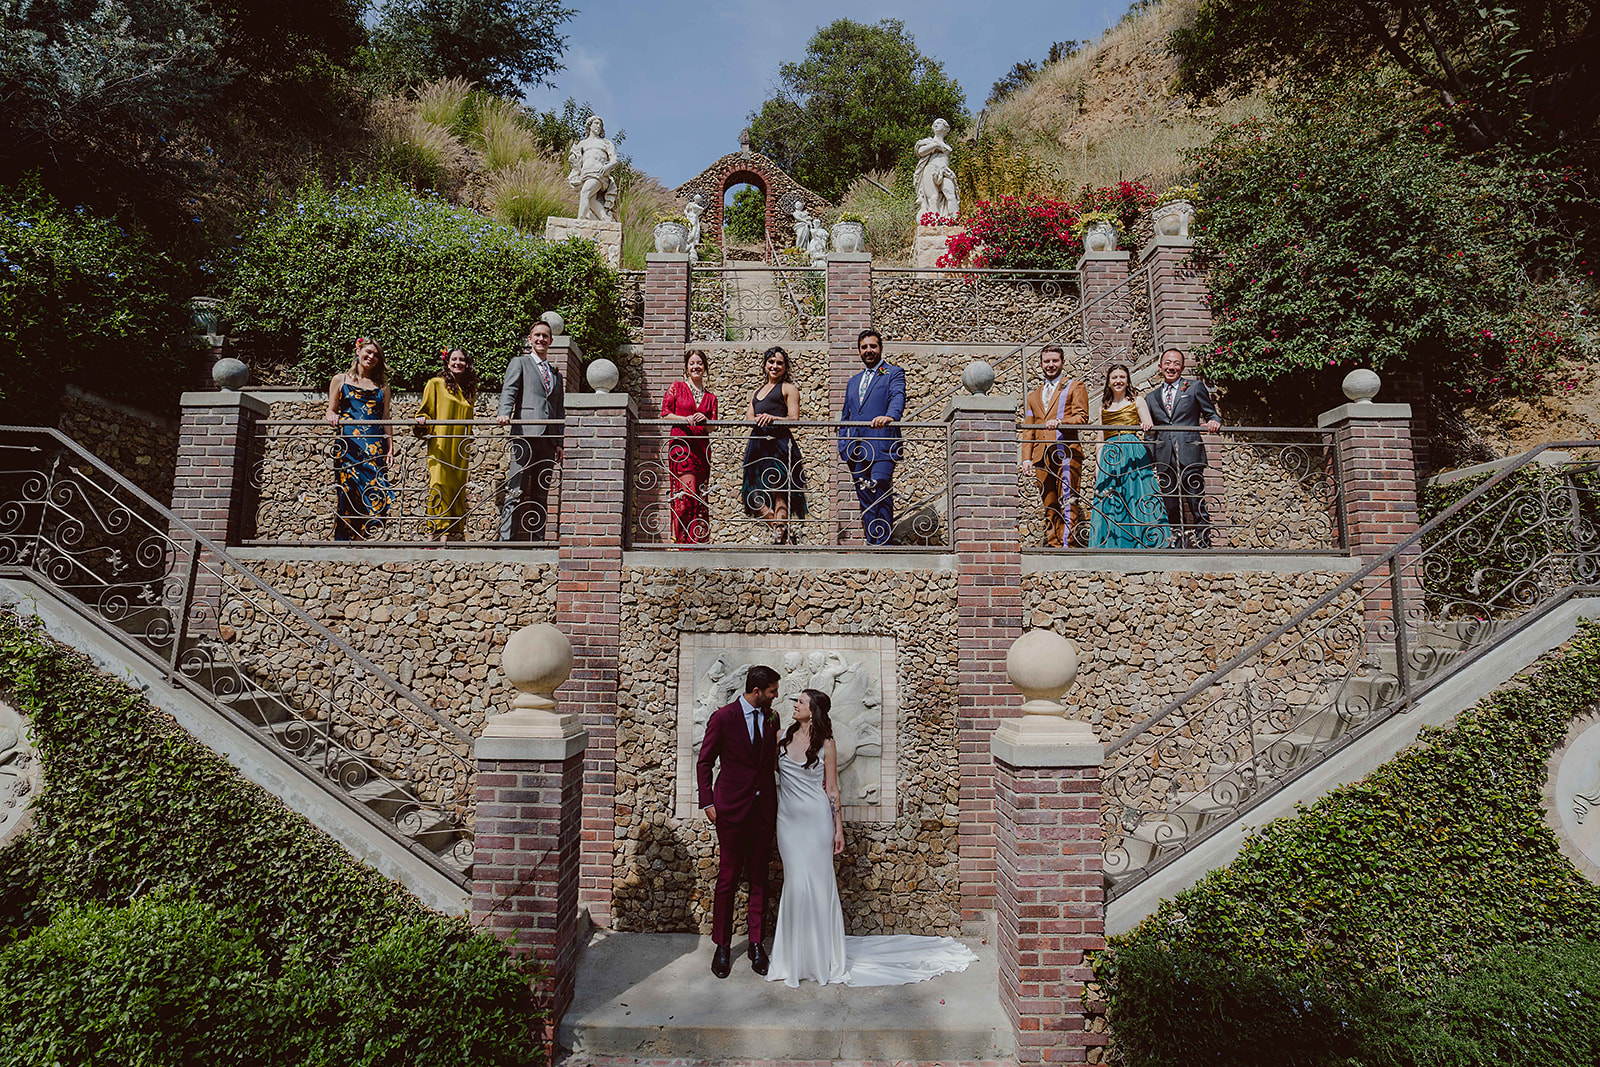  minimalist bride in satin wedding dress stands with groom in Burgundy suit at bottom of staircase with wedding party in rainbow apparel at the top of the stairs